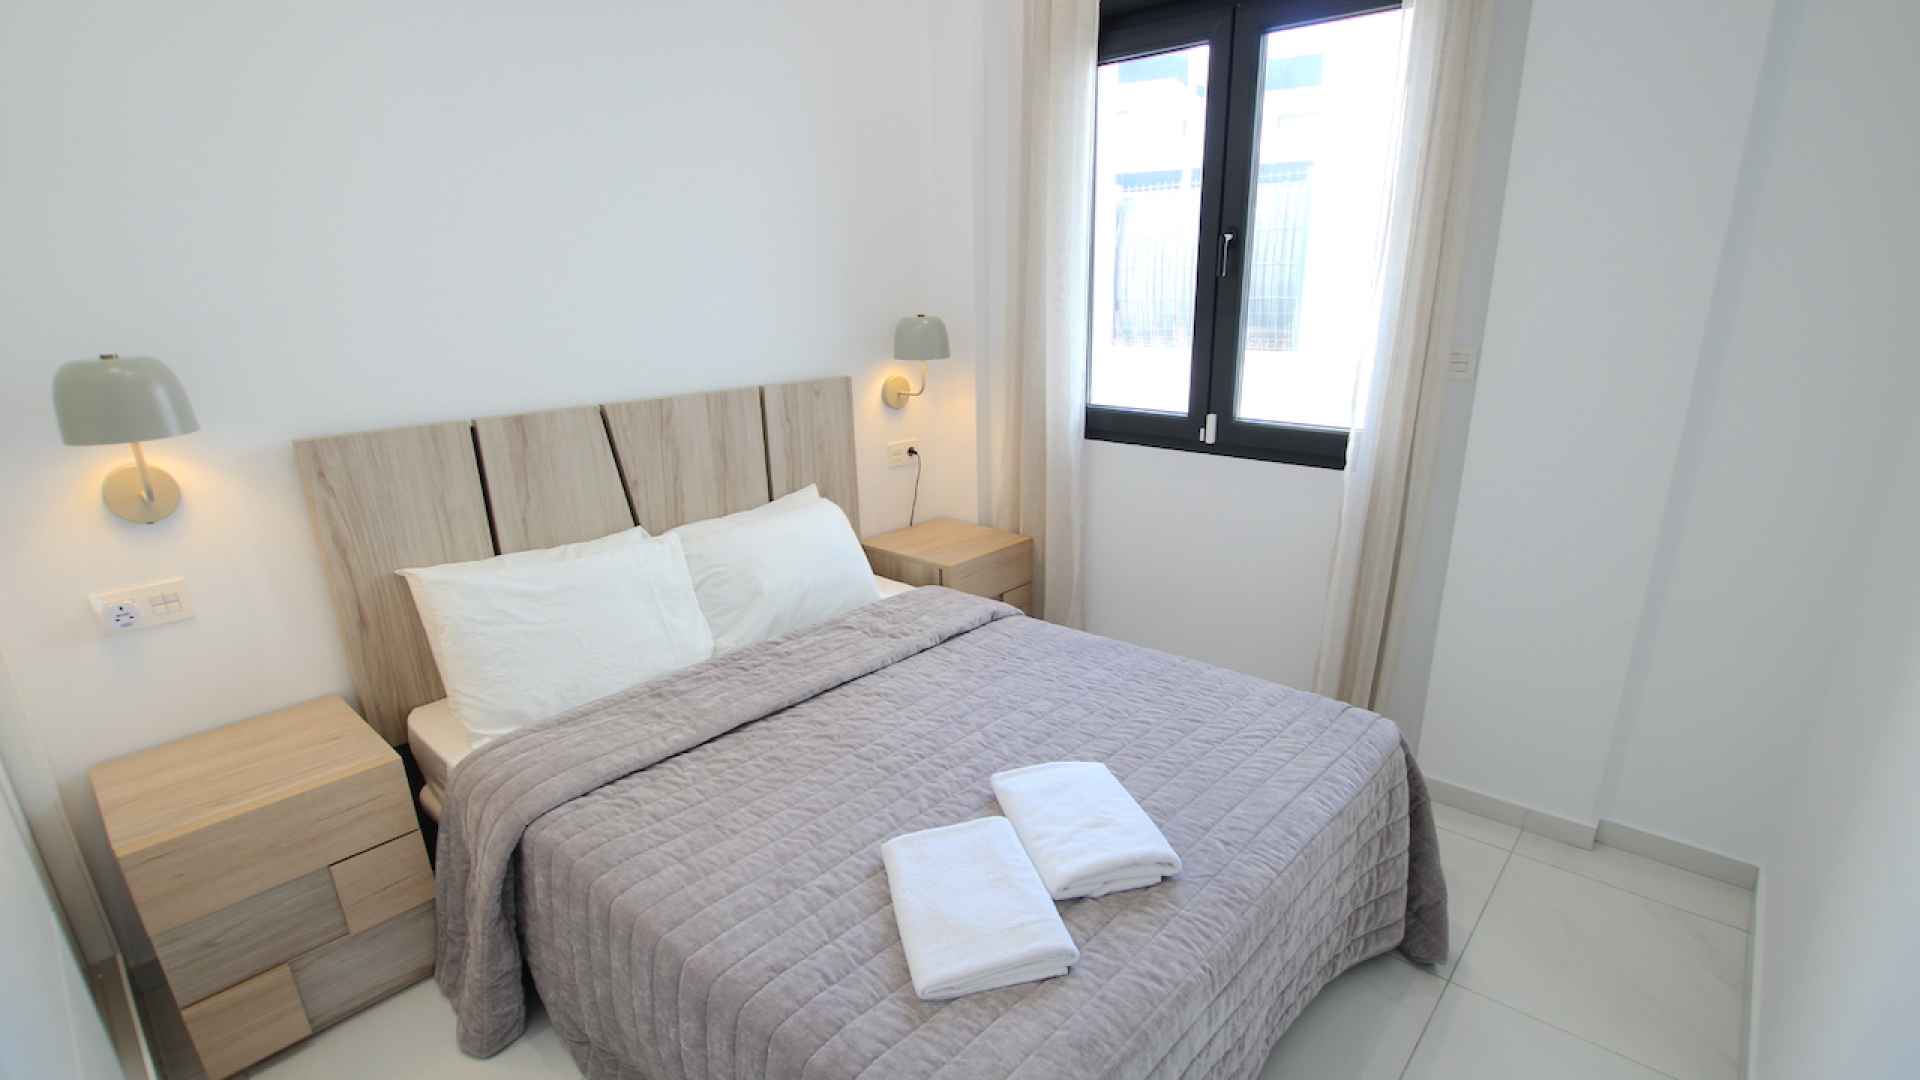 48308_stunning_3_bedroom_villa_in_a_highly_sough_after_location_201223102903_img_5071